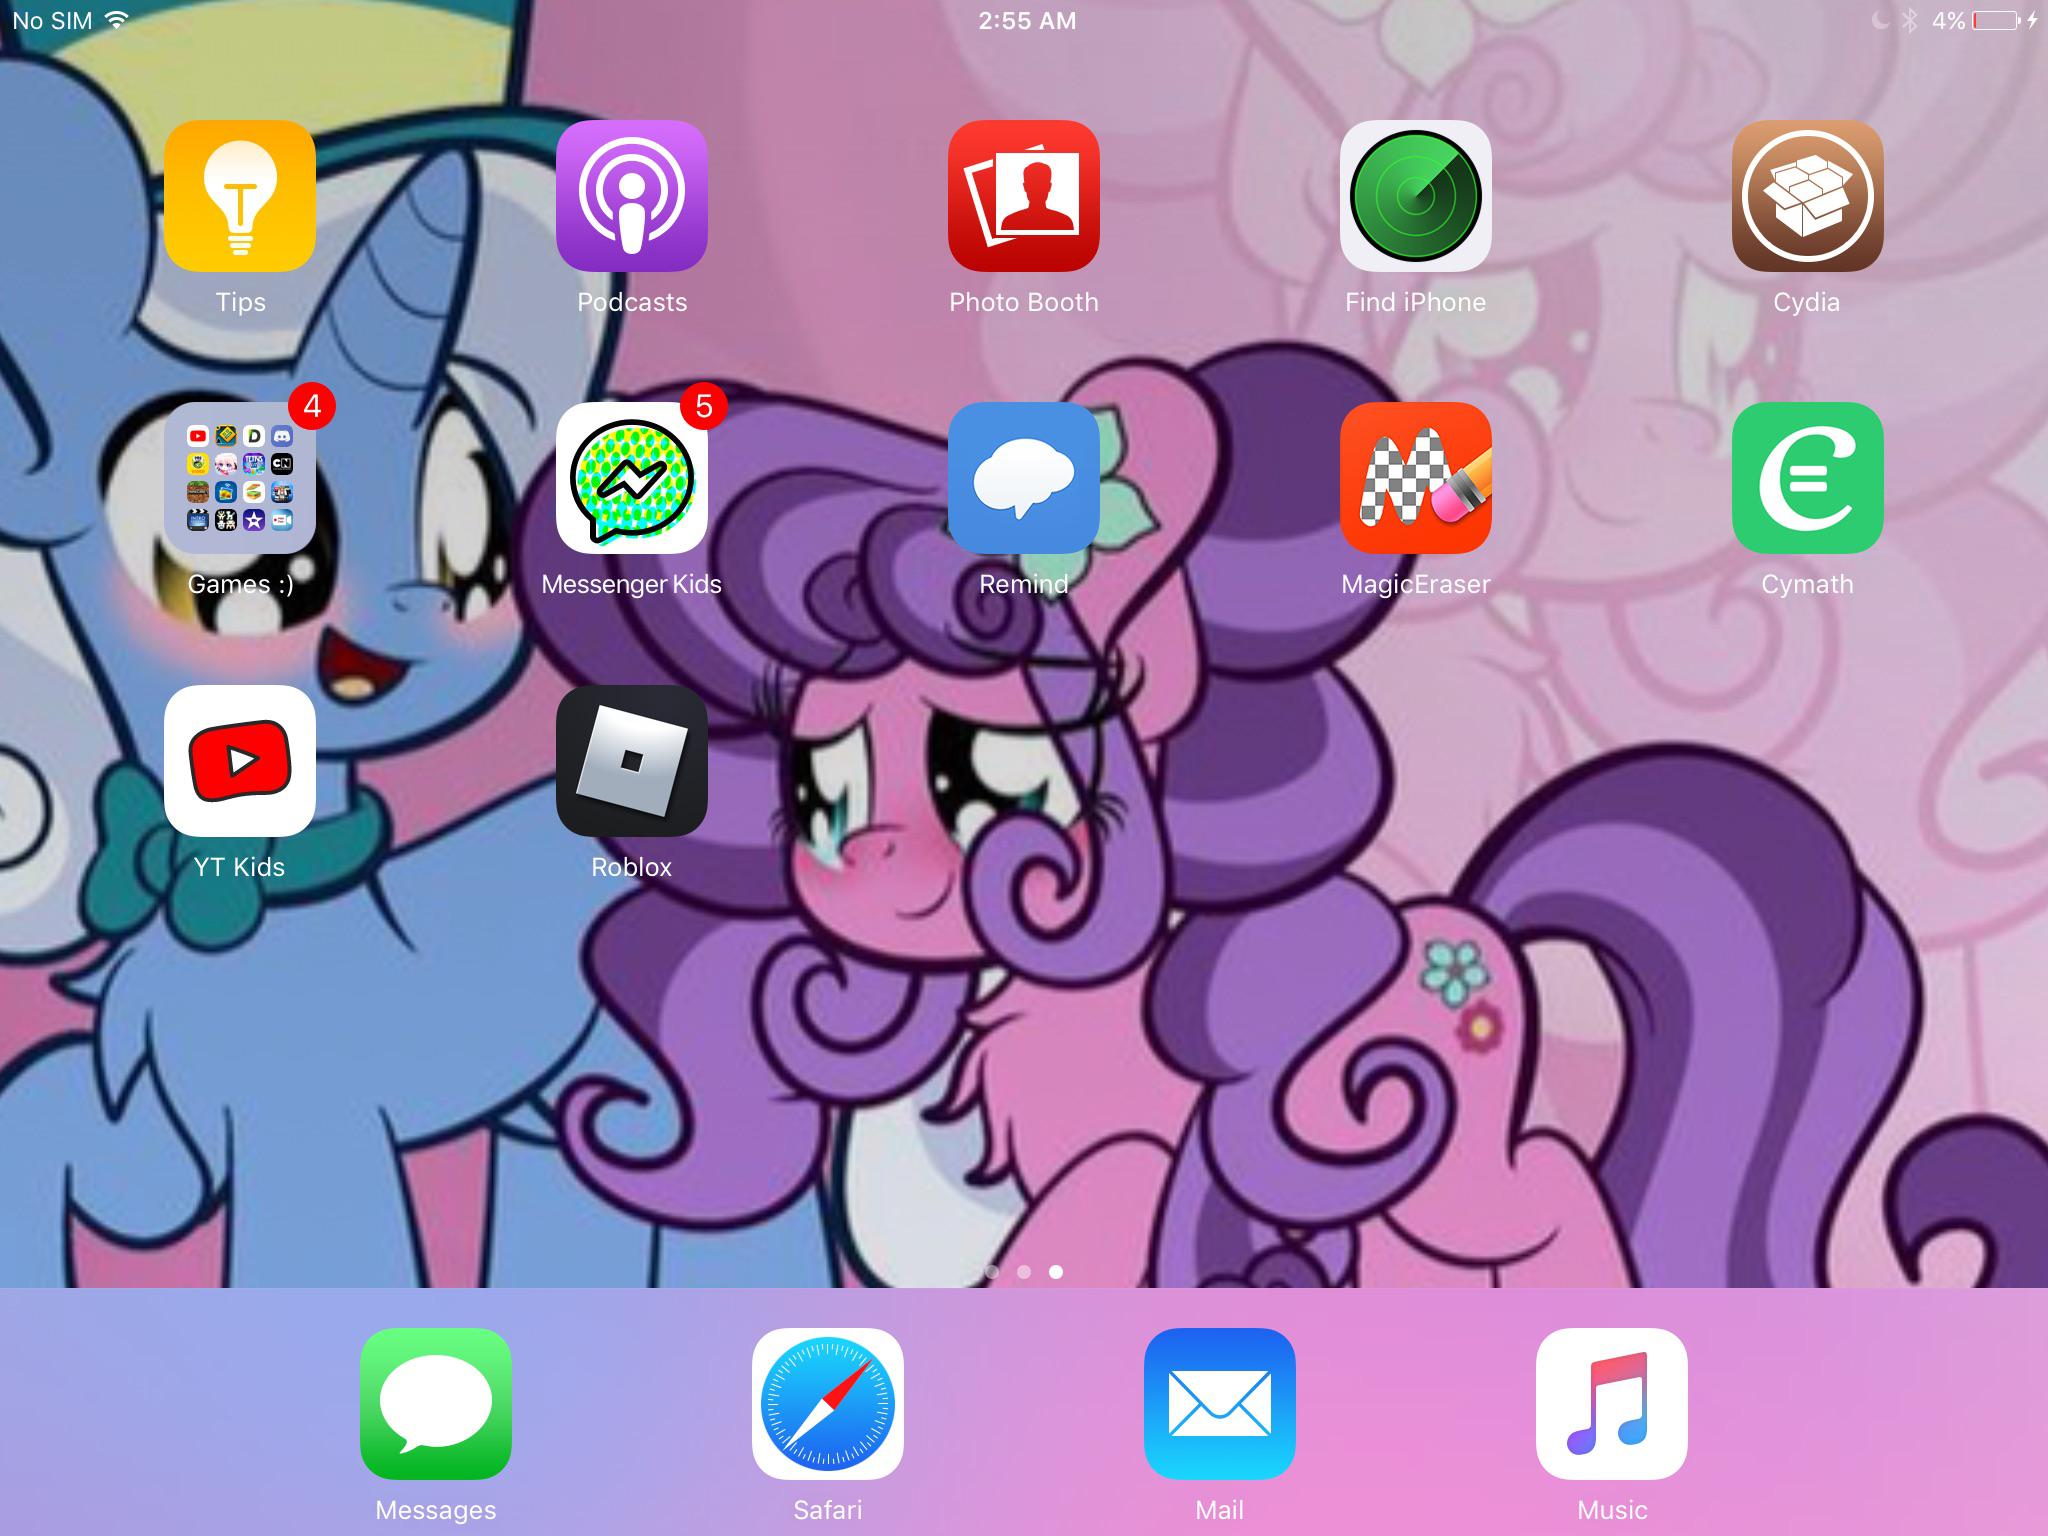 This is my wallpaper on my ipad and it still stay like this for a long time rmylittlepony